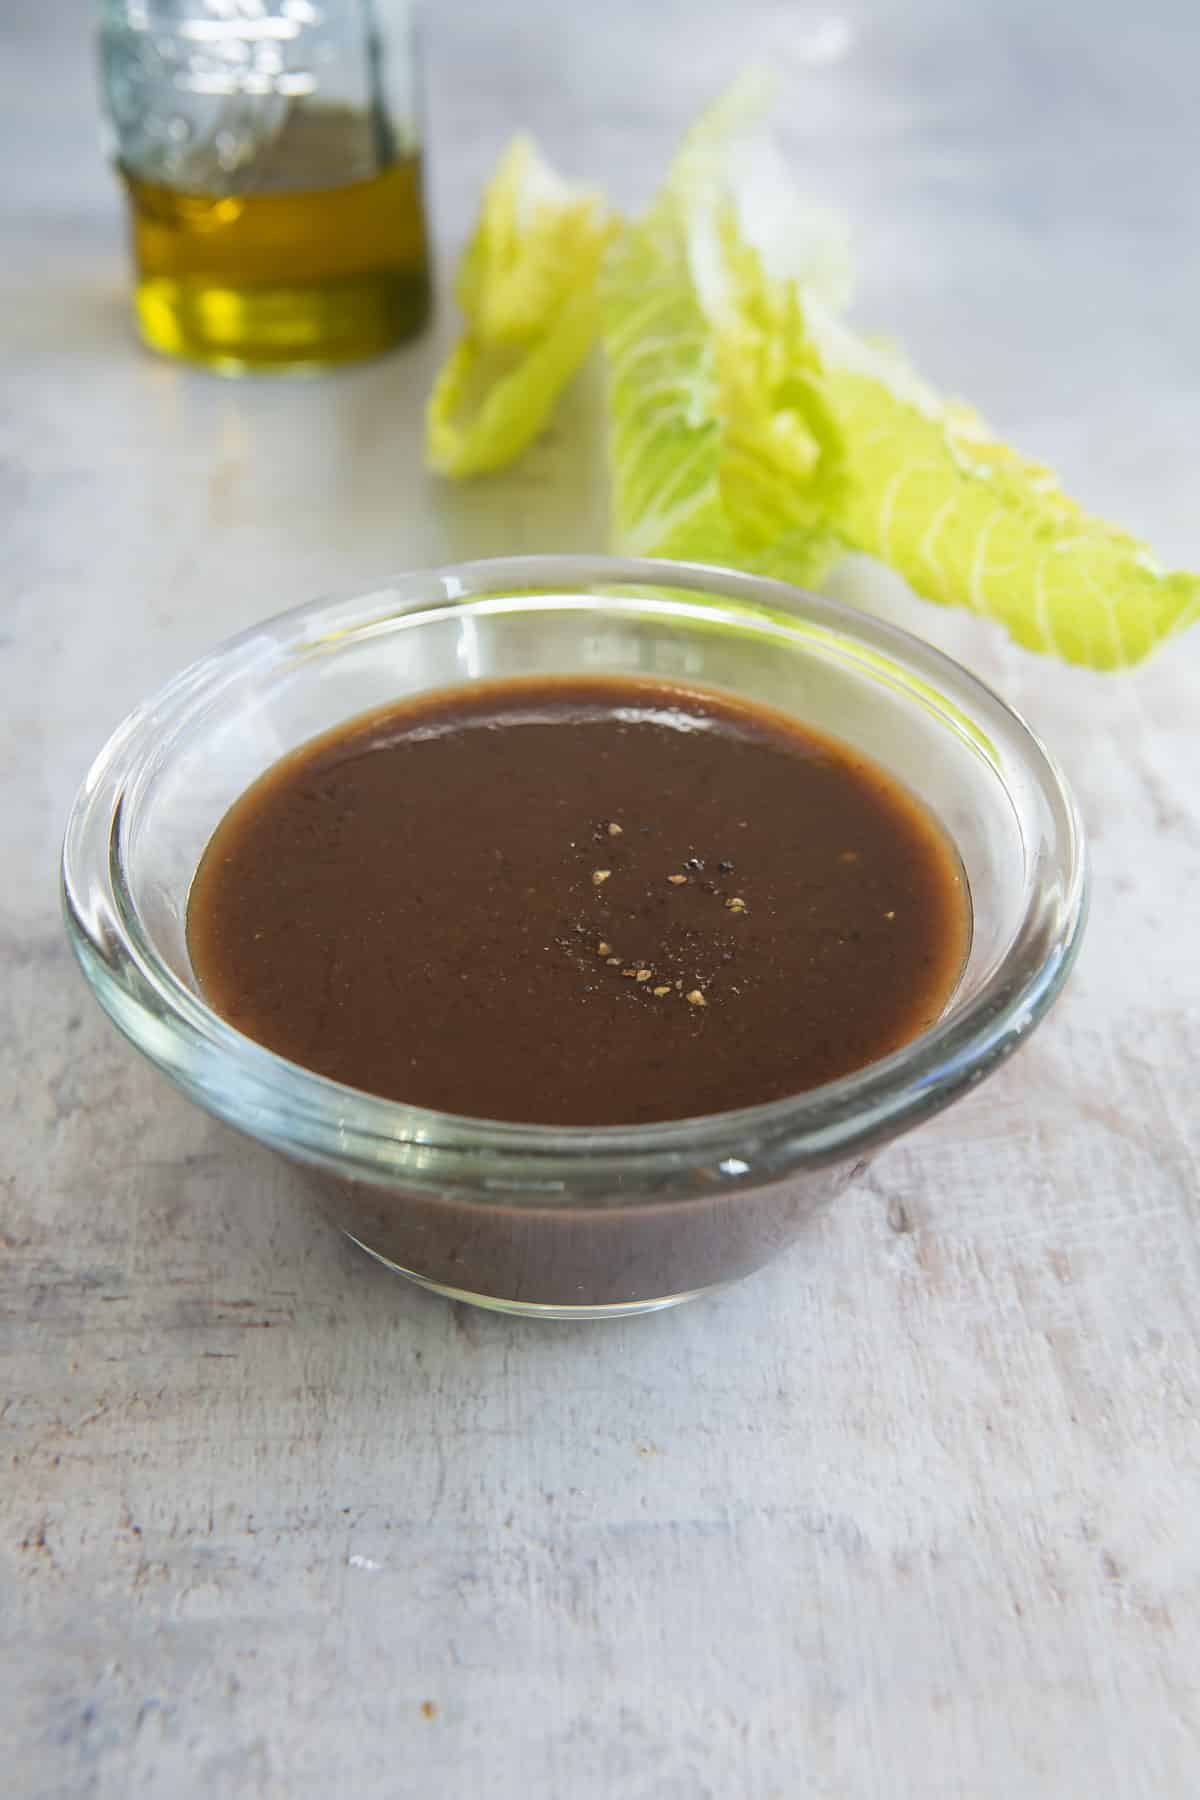 Balsamic Vinaigrette in a clear glass dish next to leafs of romaine lettuce.